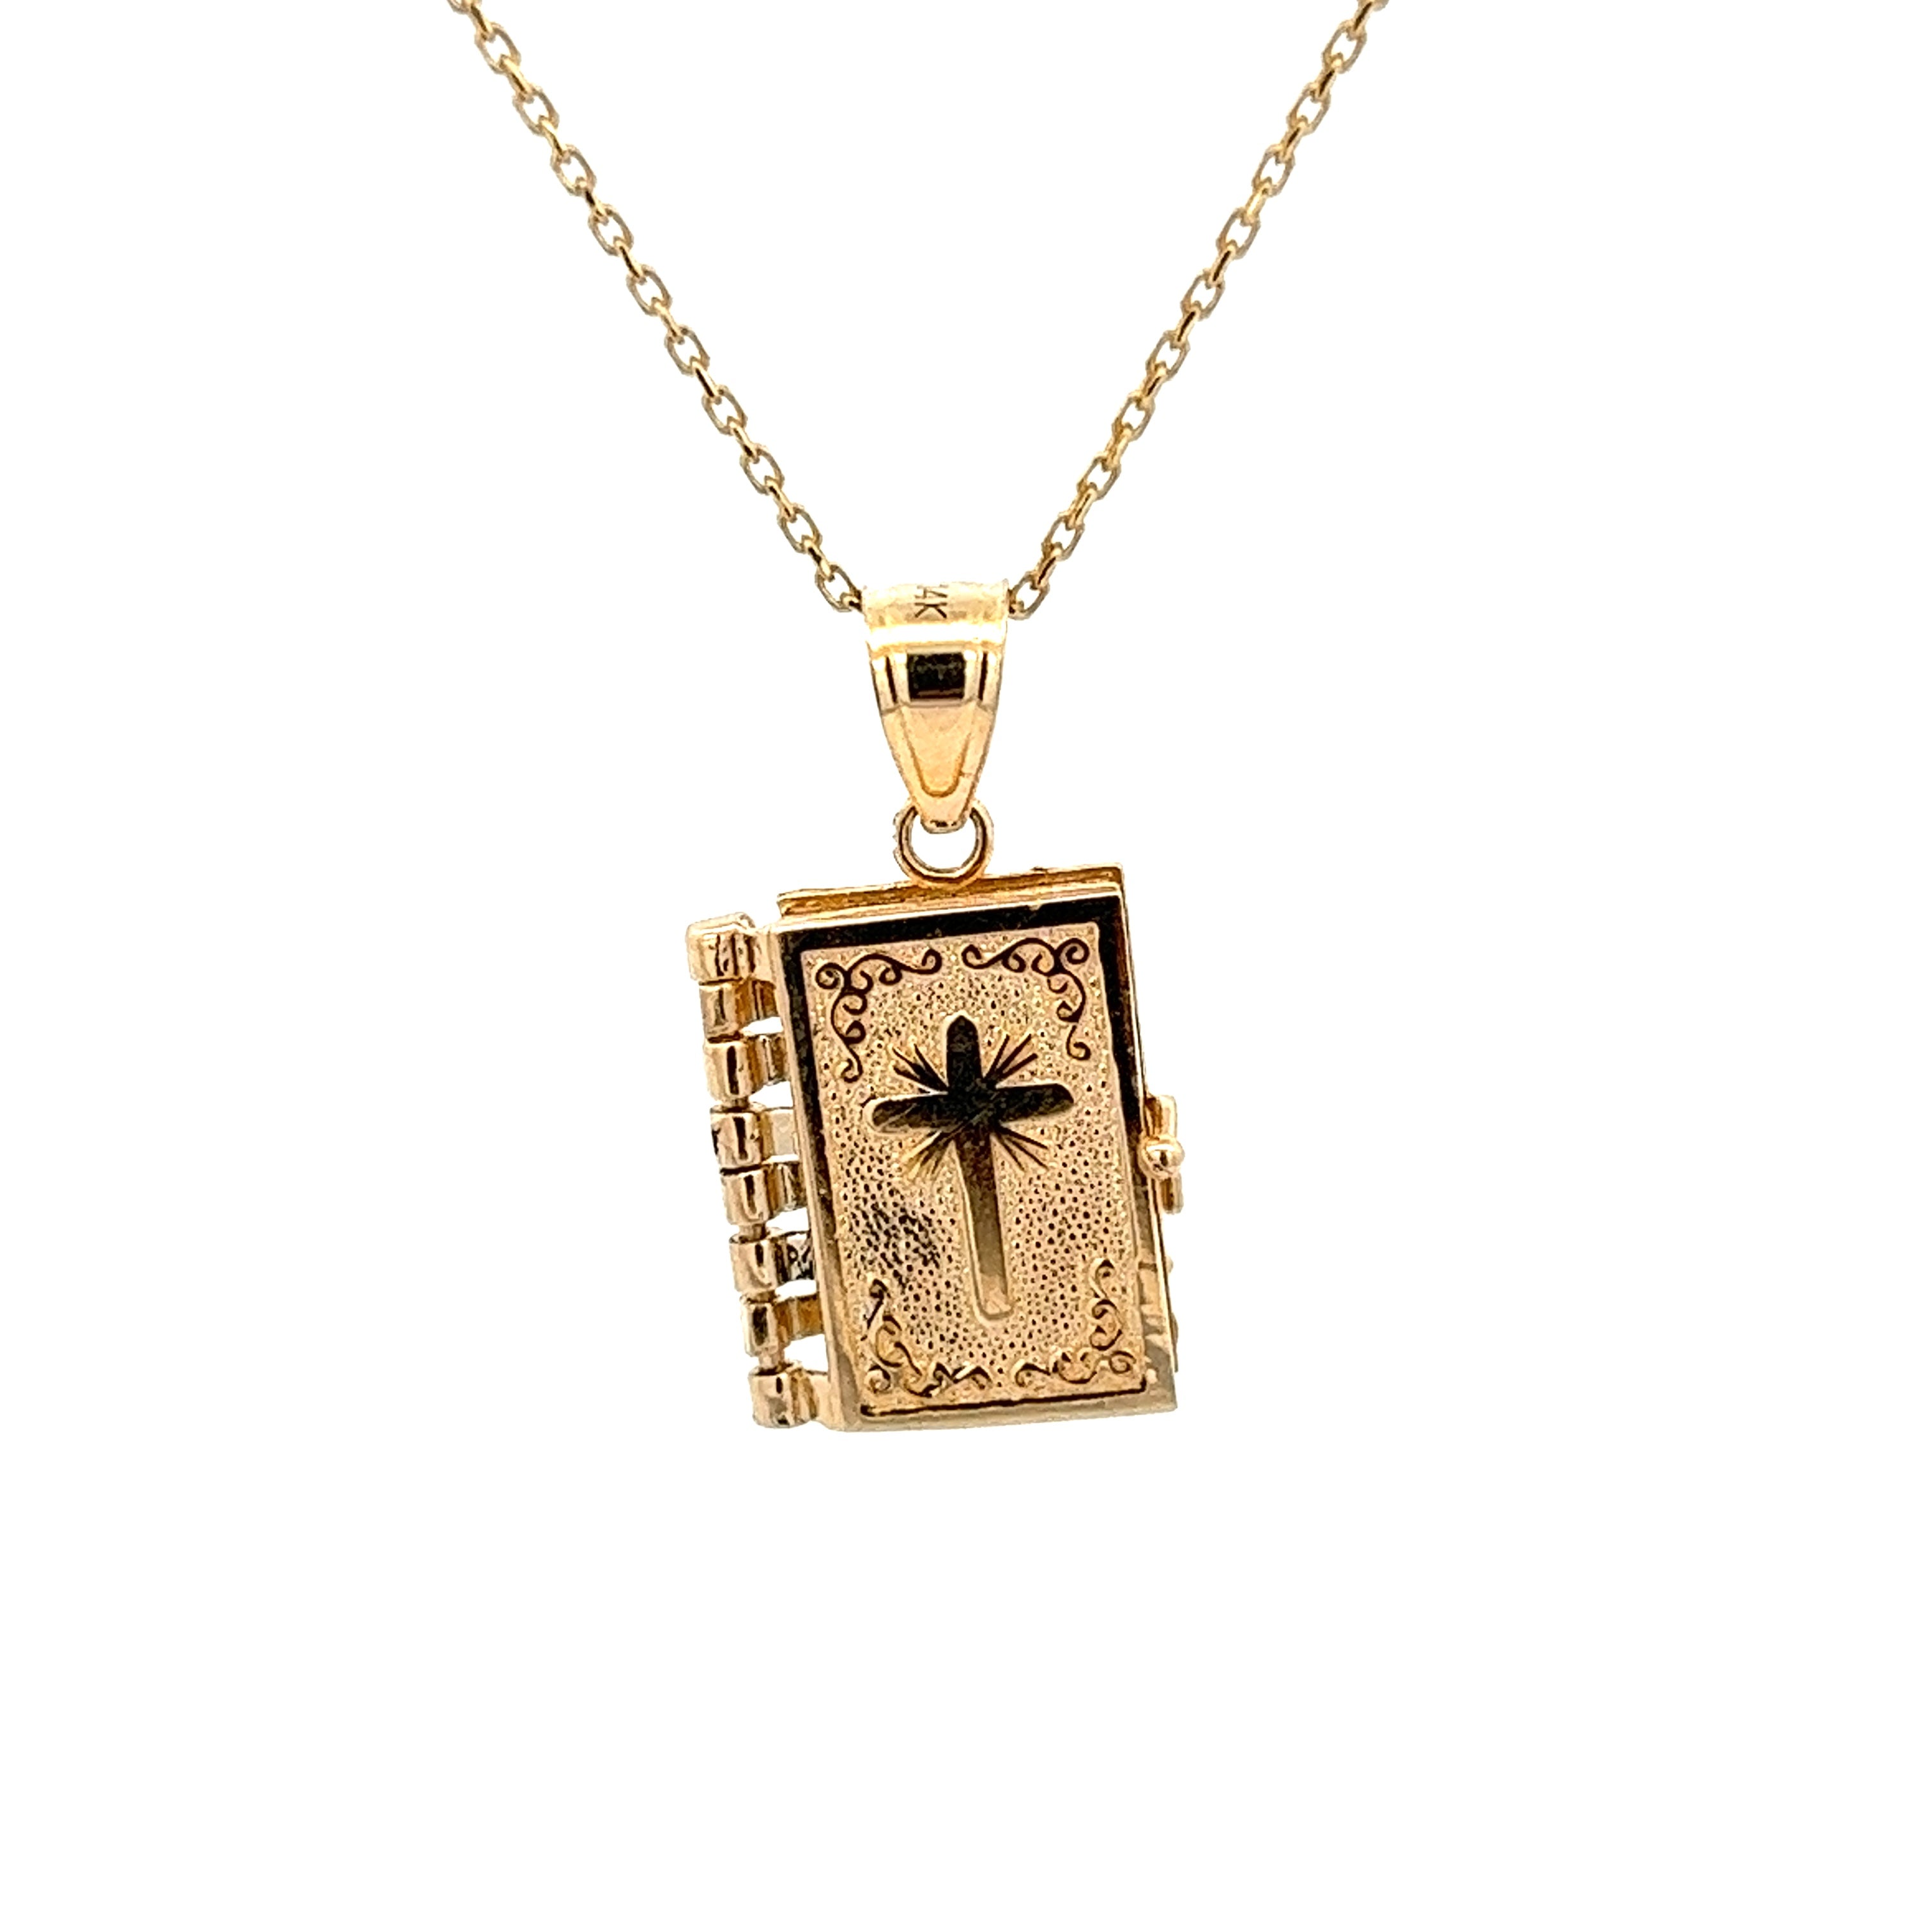 14K GOLD CHARM BOOK OF THE OUR FATHER